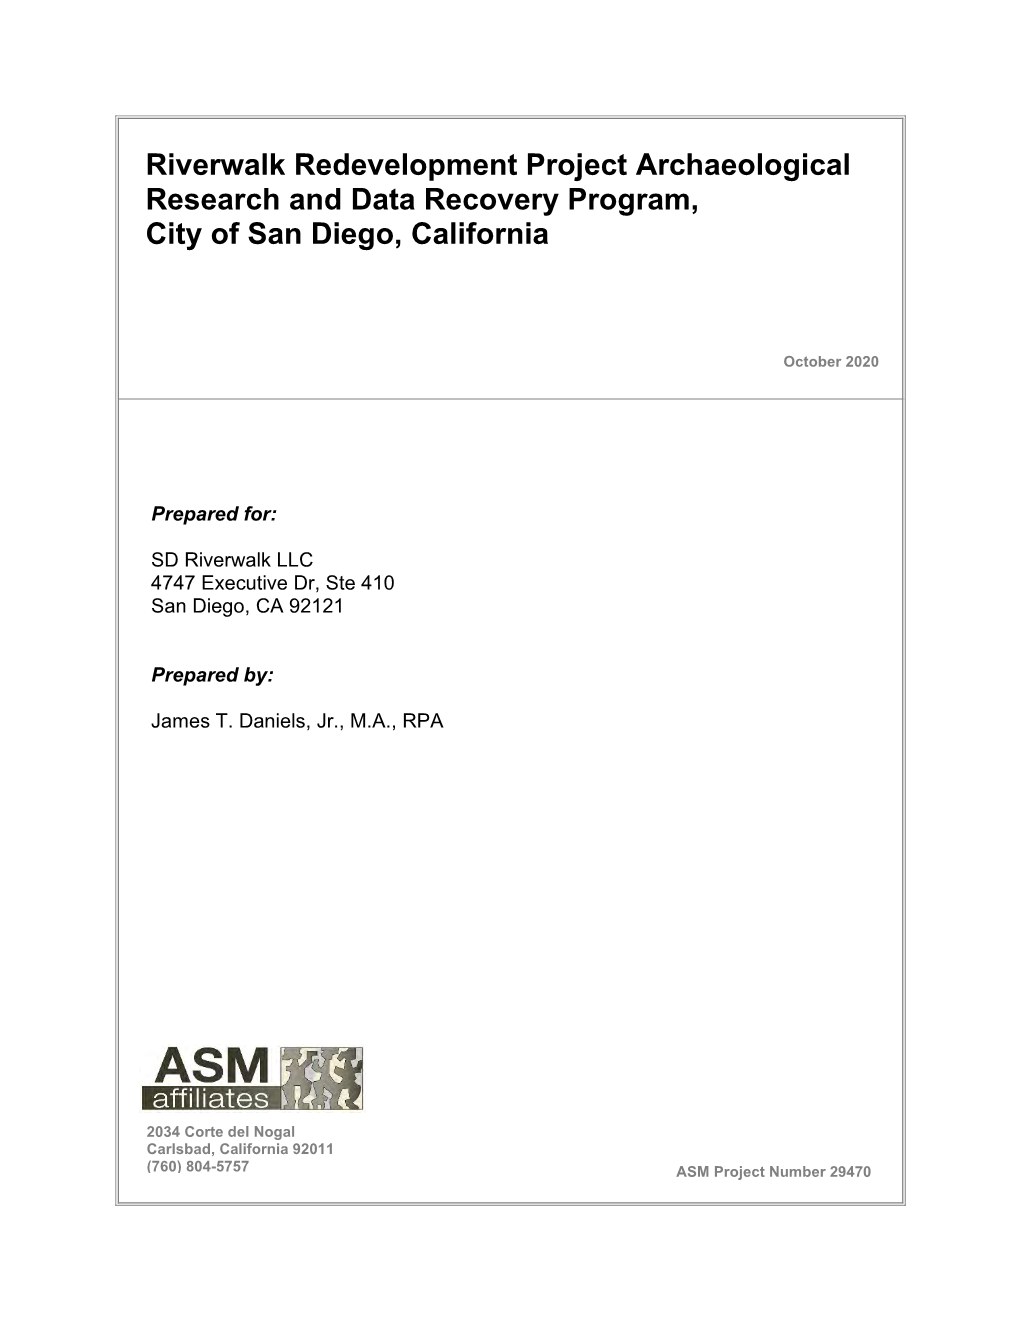 Archaeological Research & Data Recovery Program